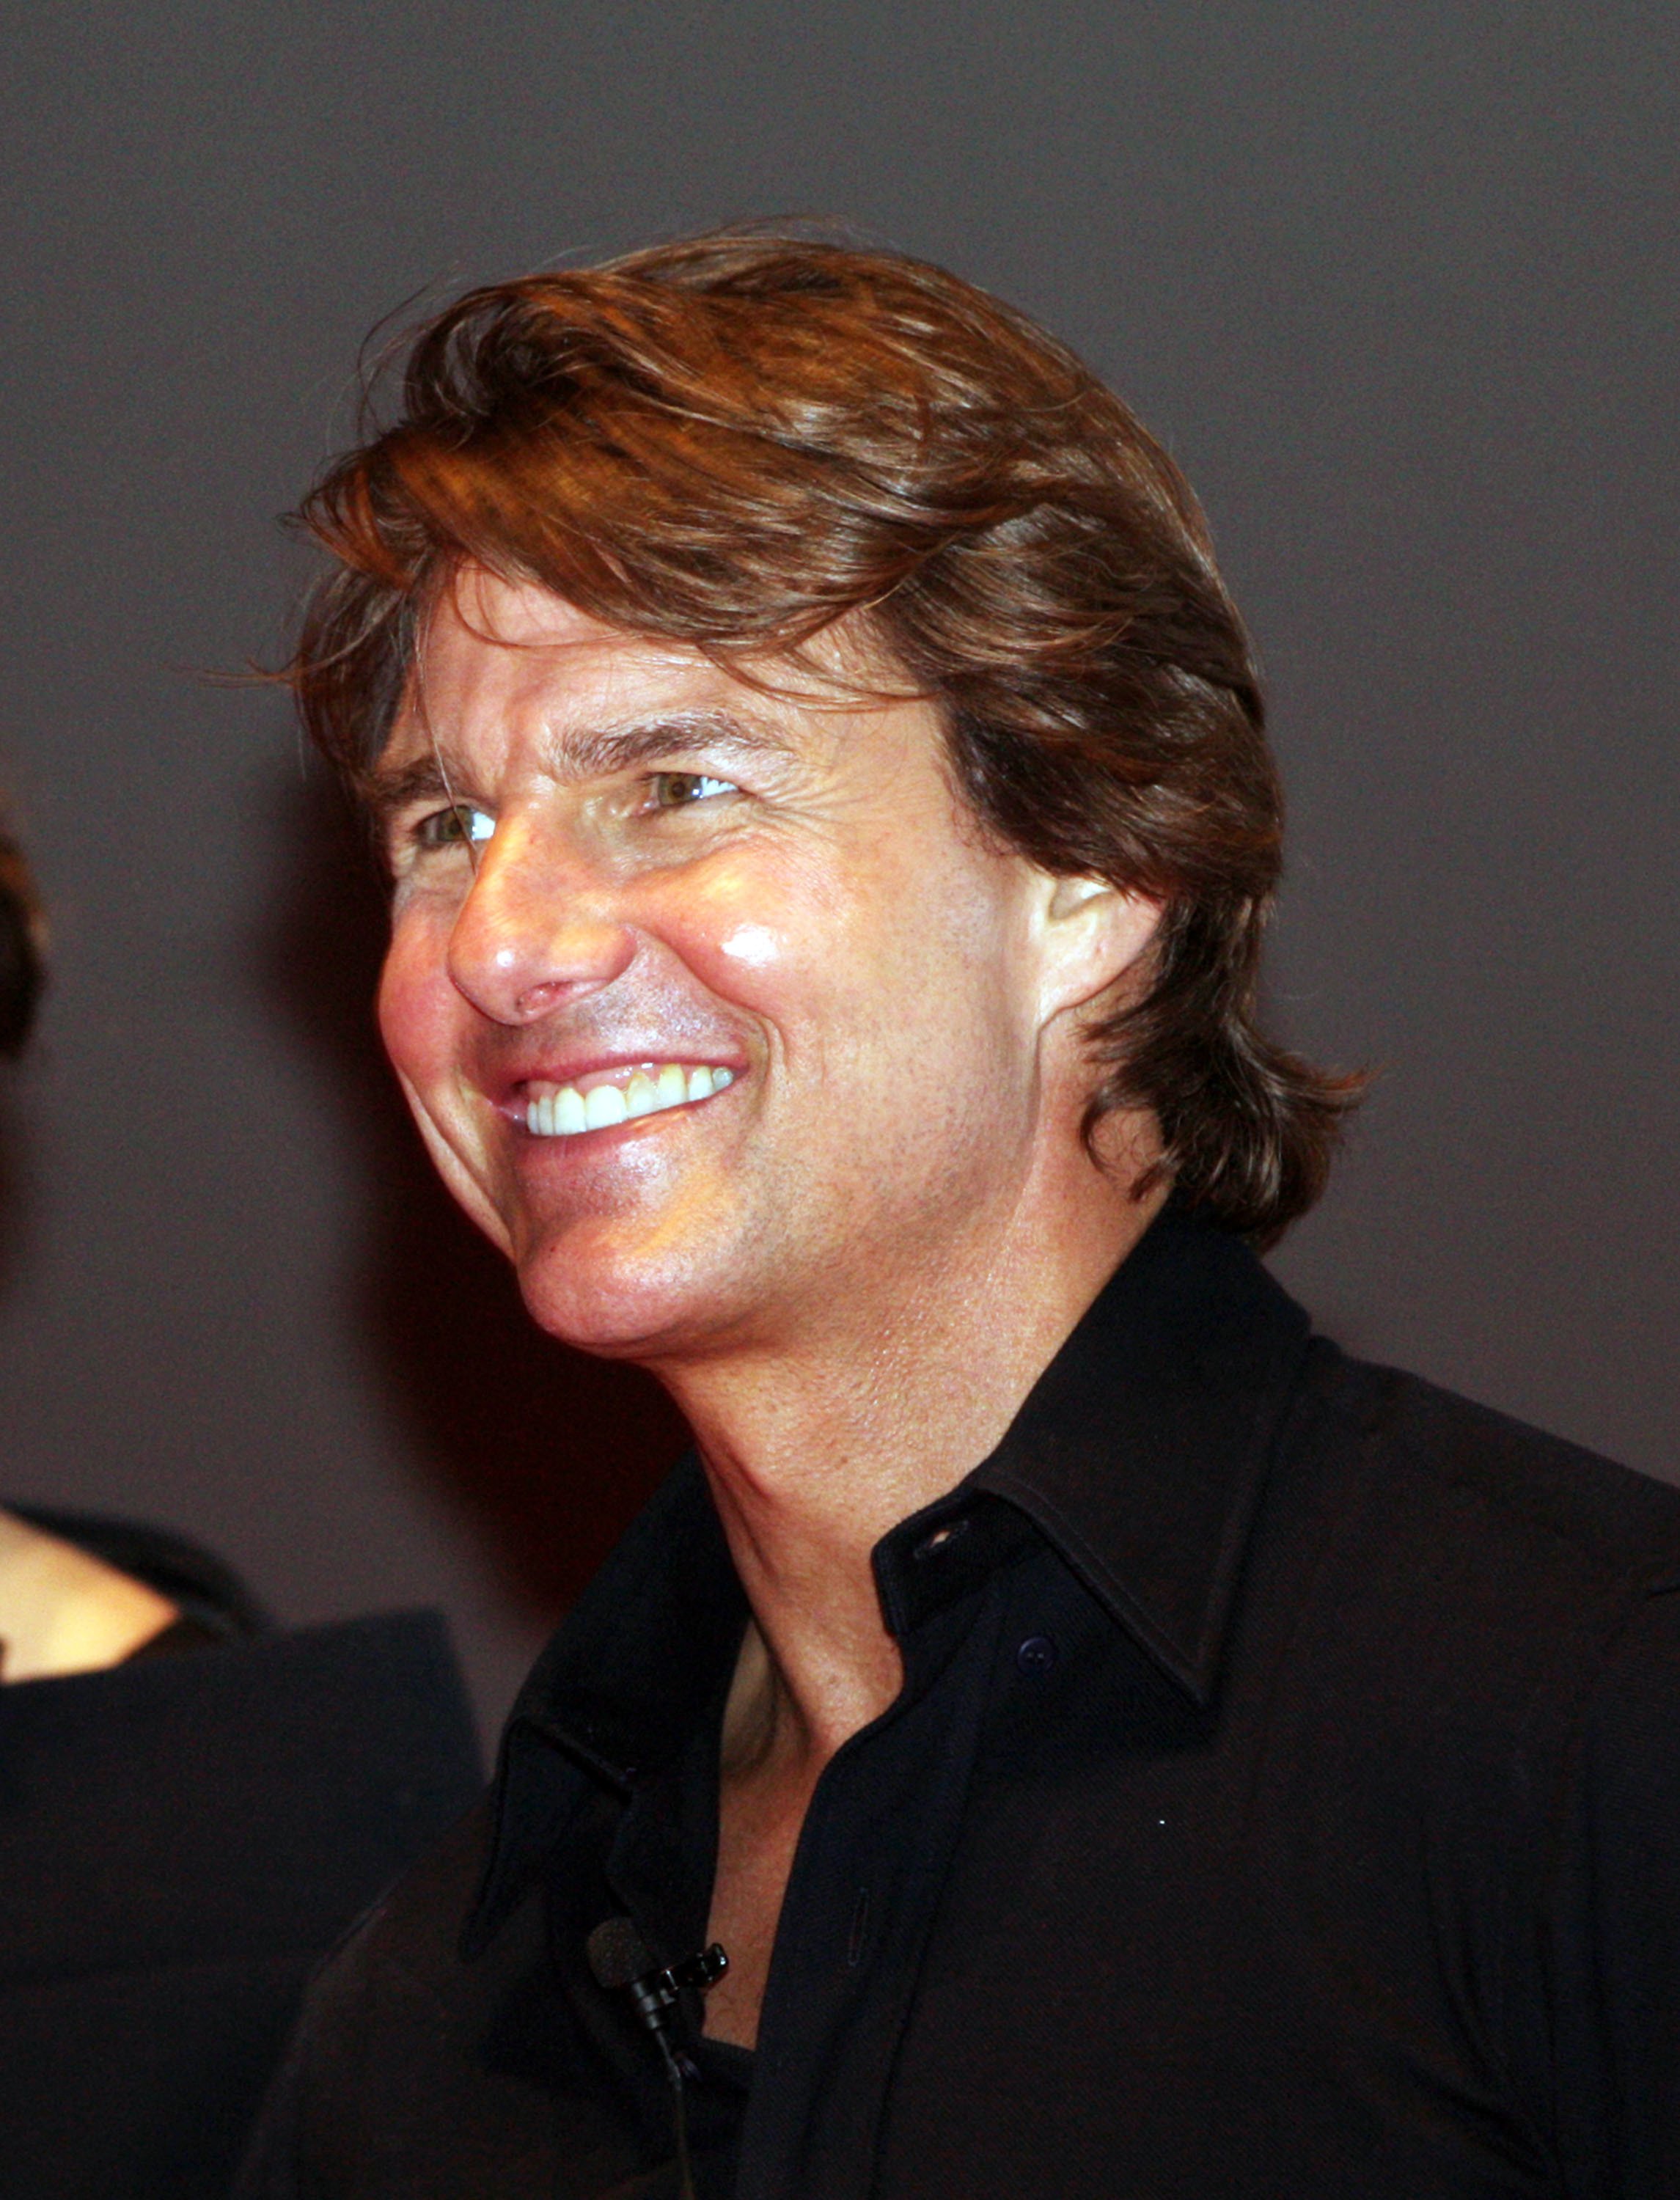 mission-impossible-rogue-nation-shanghai-premiere-sept7-2015-062.jpg